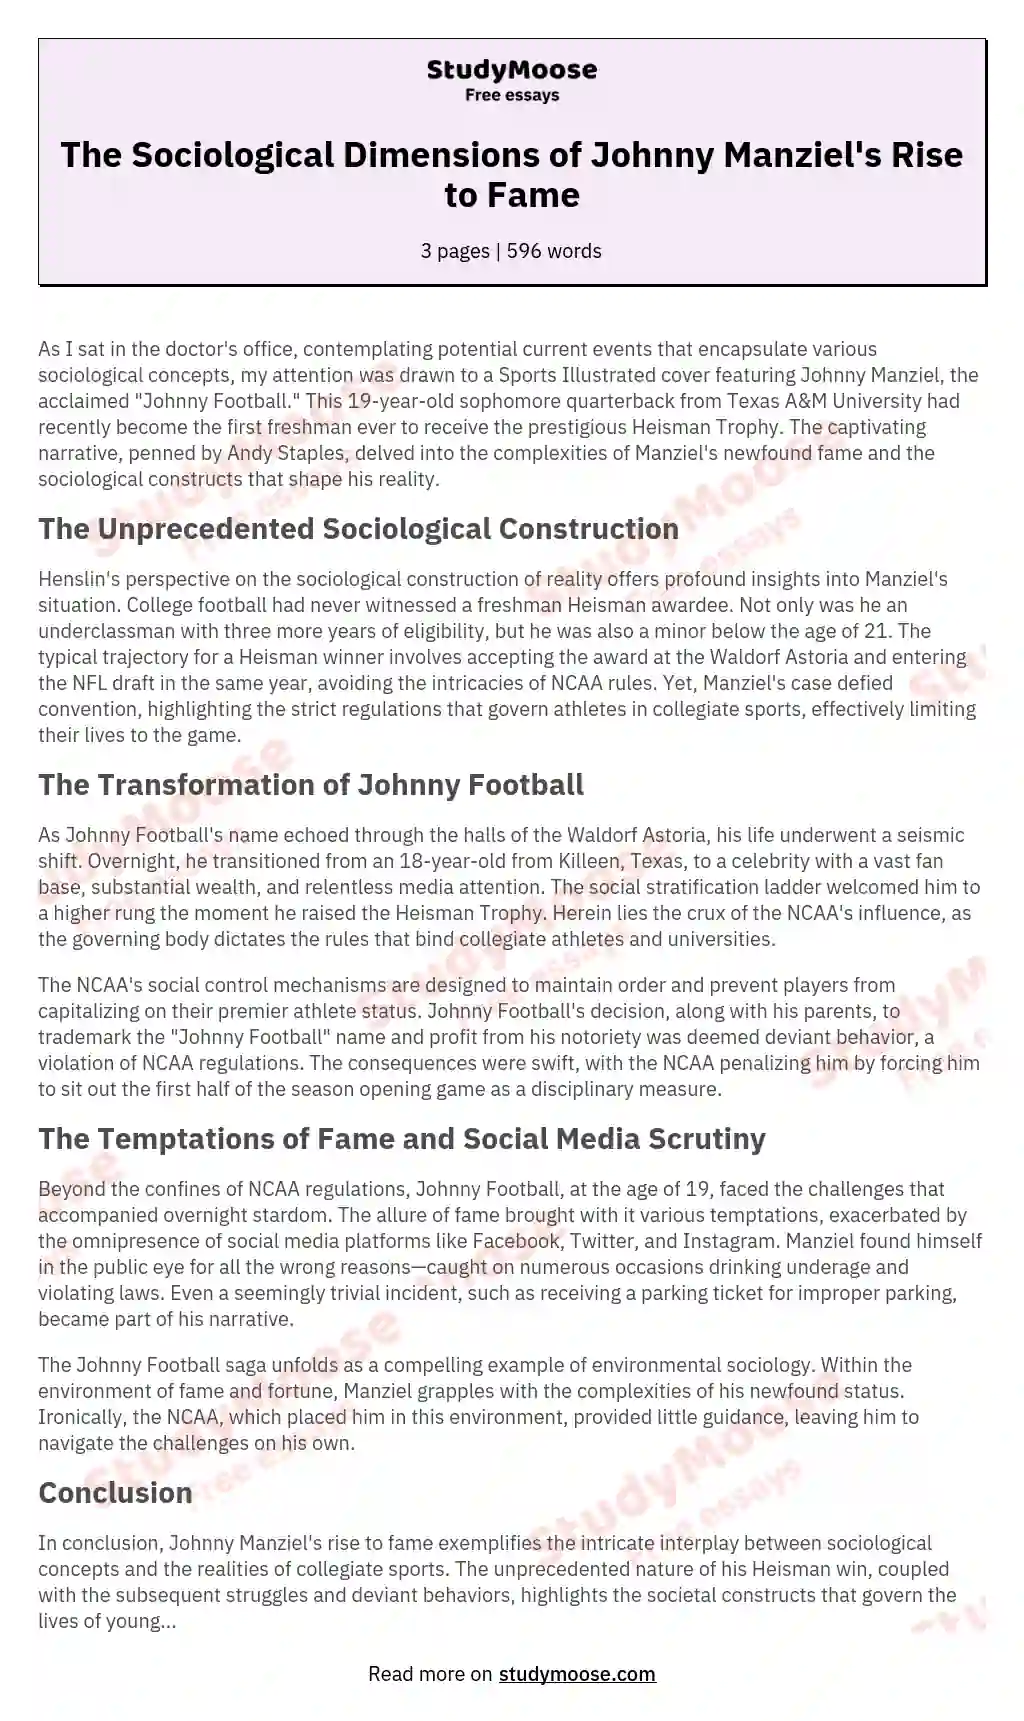 The Sociological Dimensions of Johnny Manziel's Rise to Fame essay